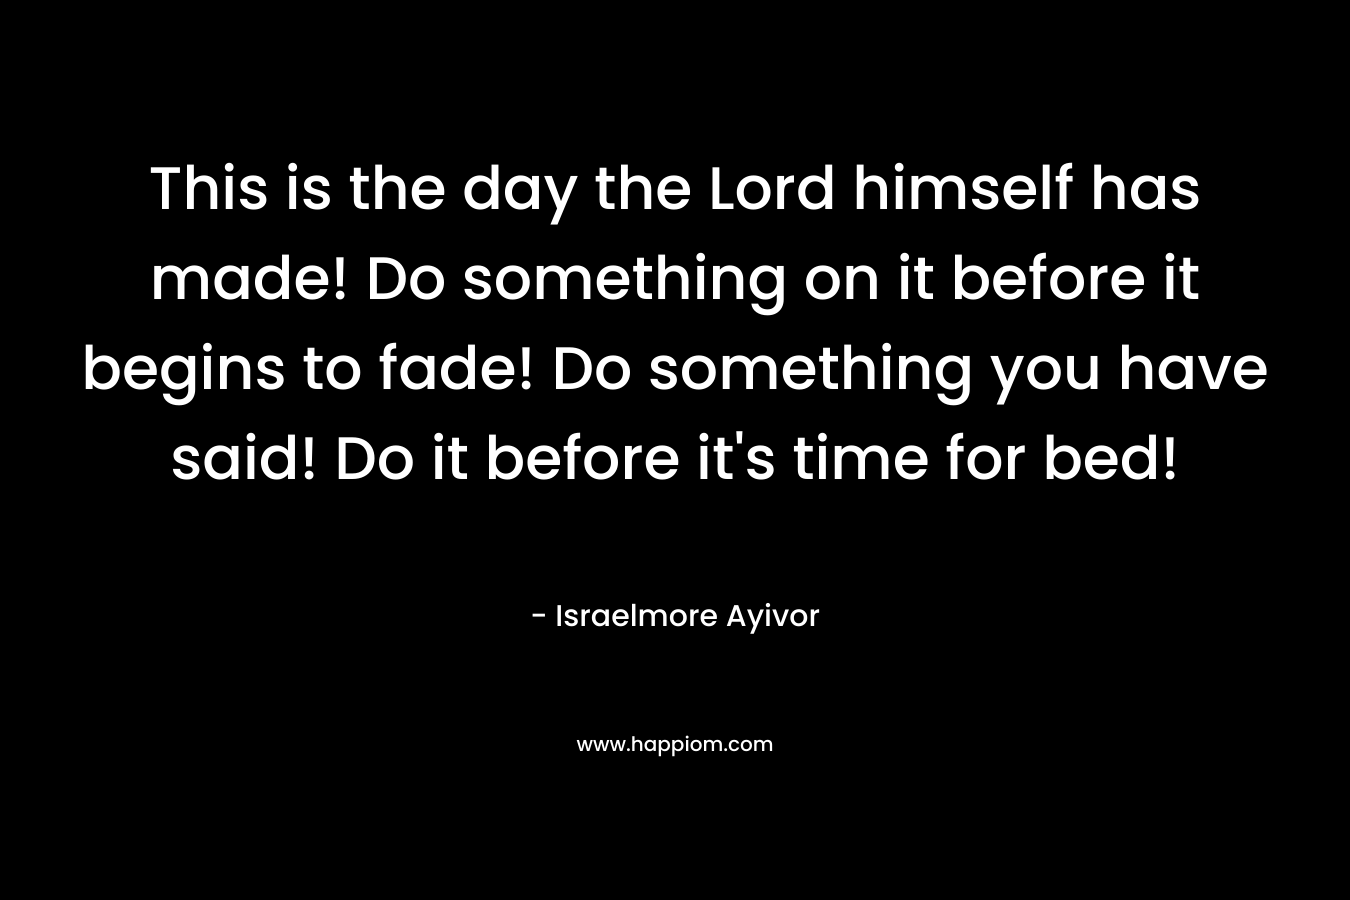 This is the day the Lord himself has made! Do something on it before it begins to fade! Do something you have said! Do it before it's time for bed!